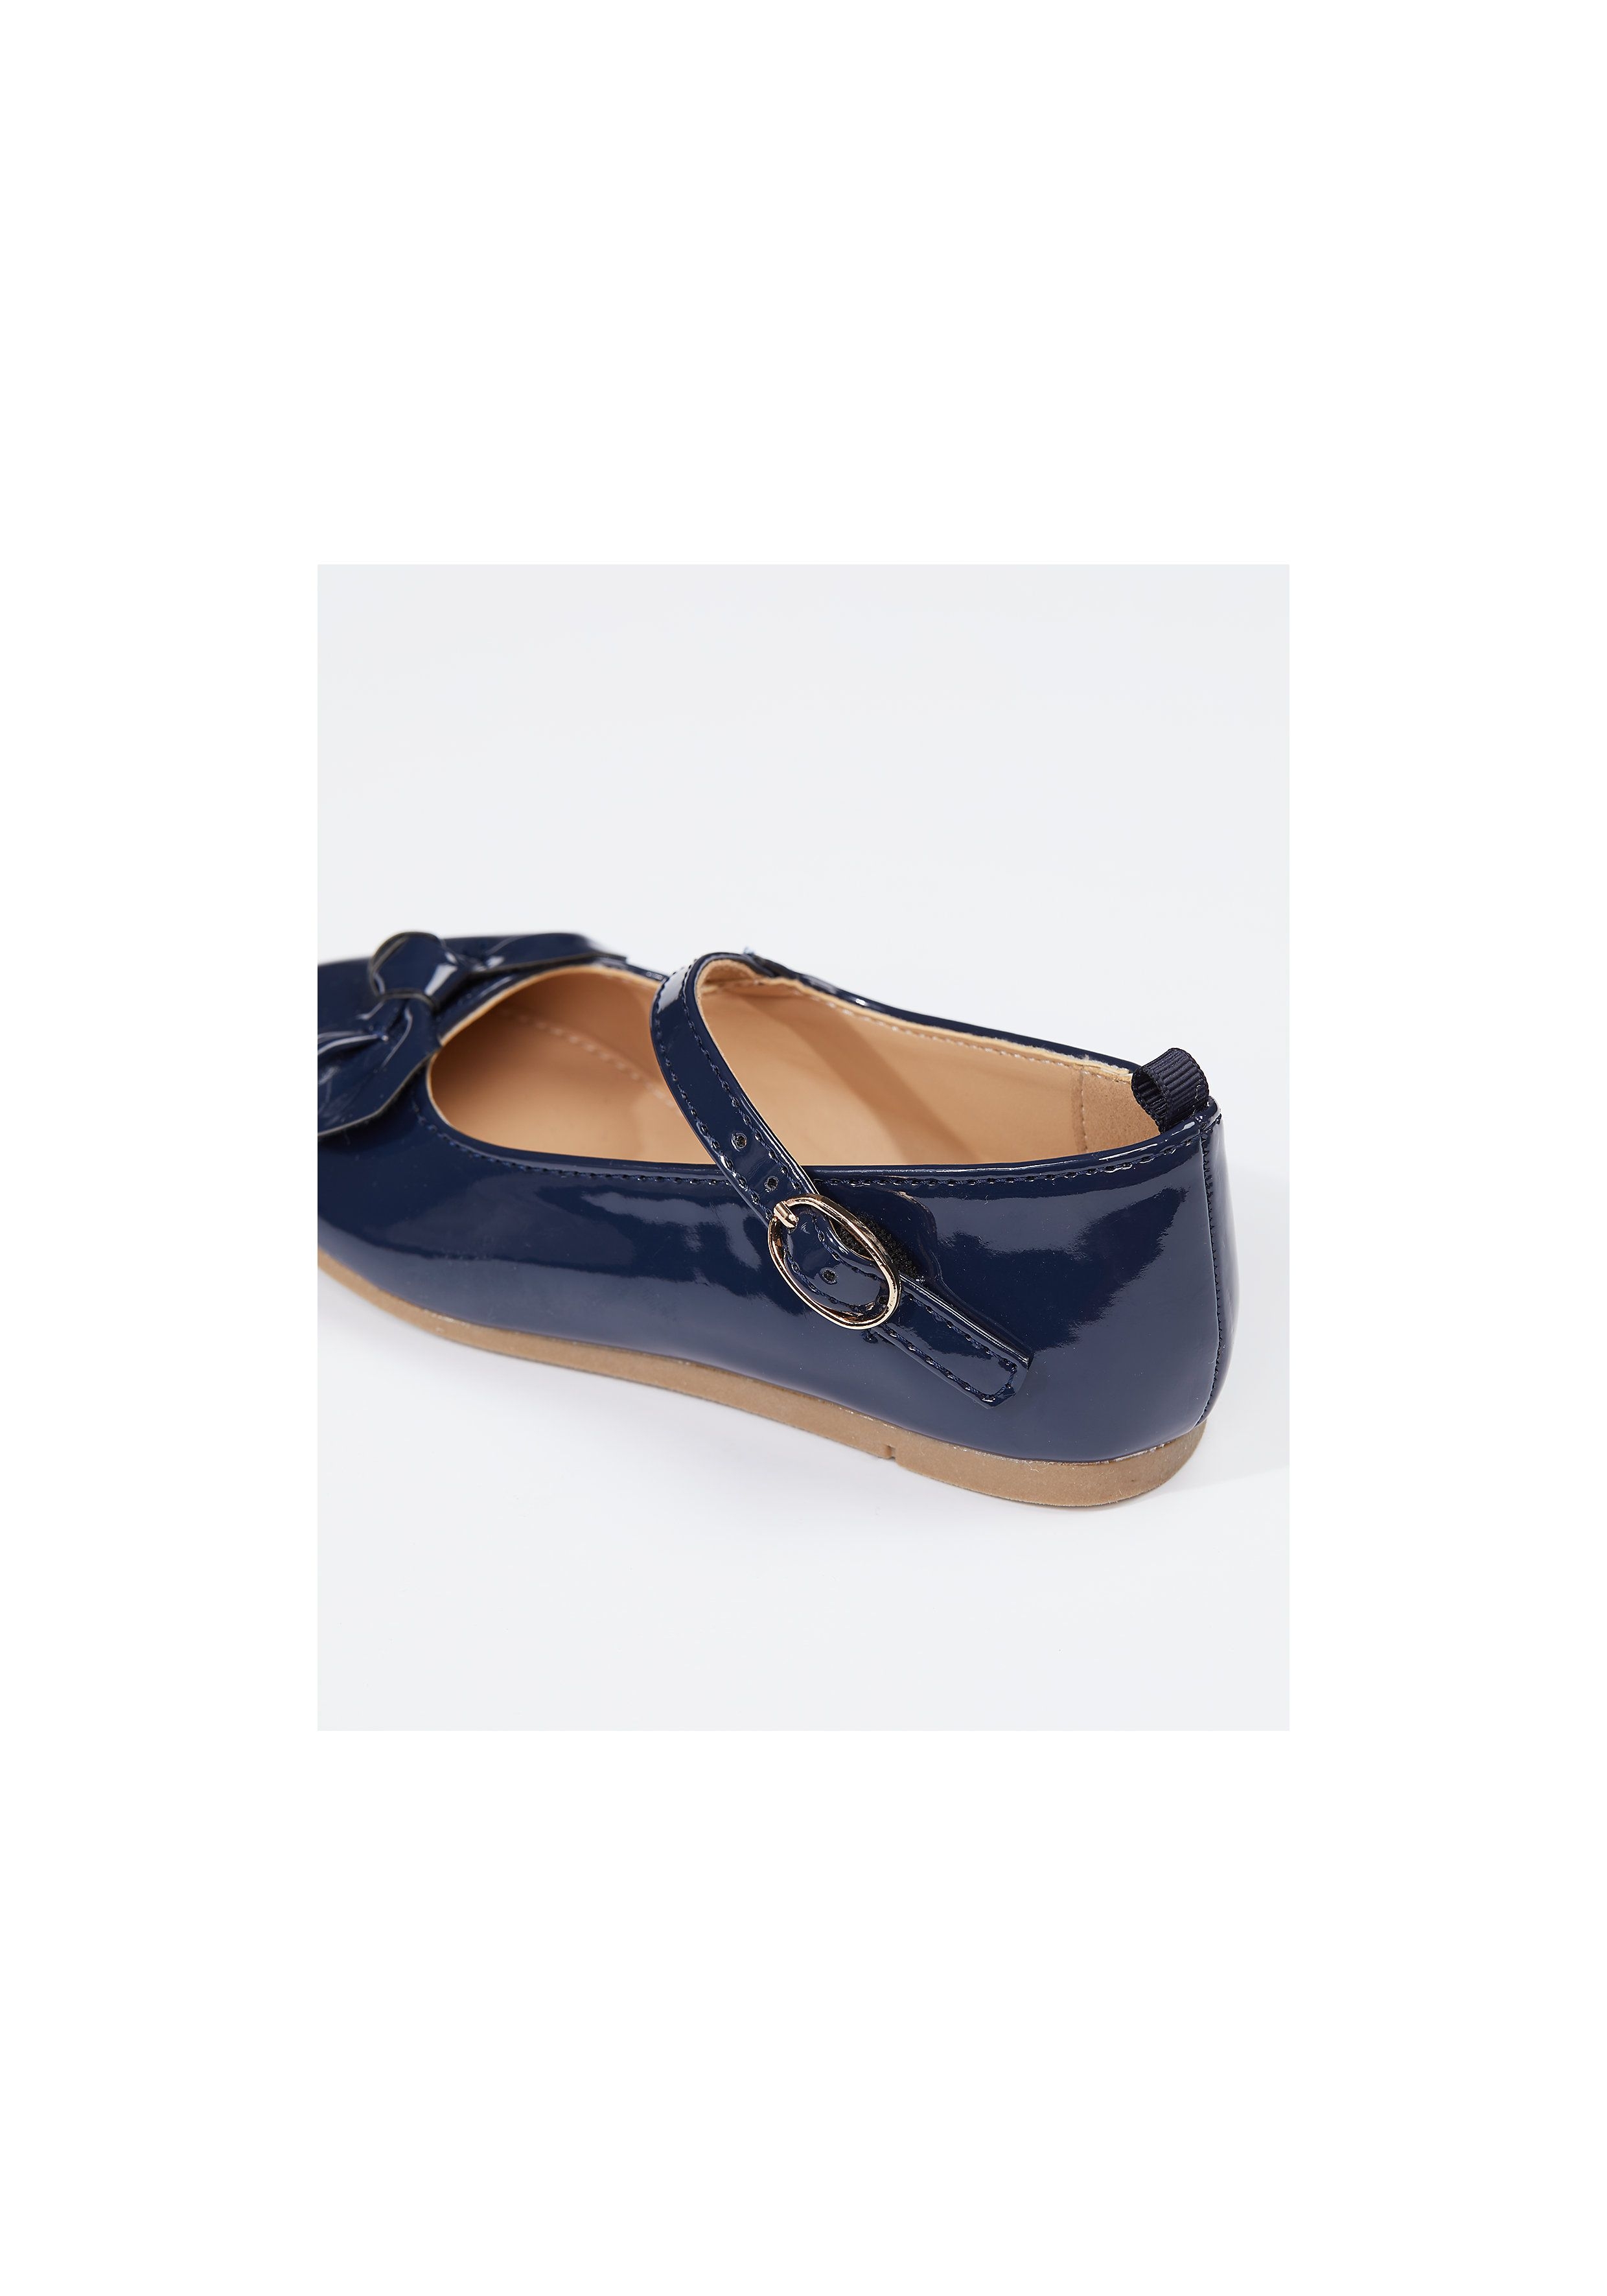 Mothercare | Girls Navy Patent Ballerina Shoes - Navy 2